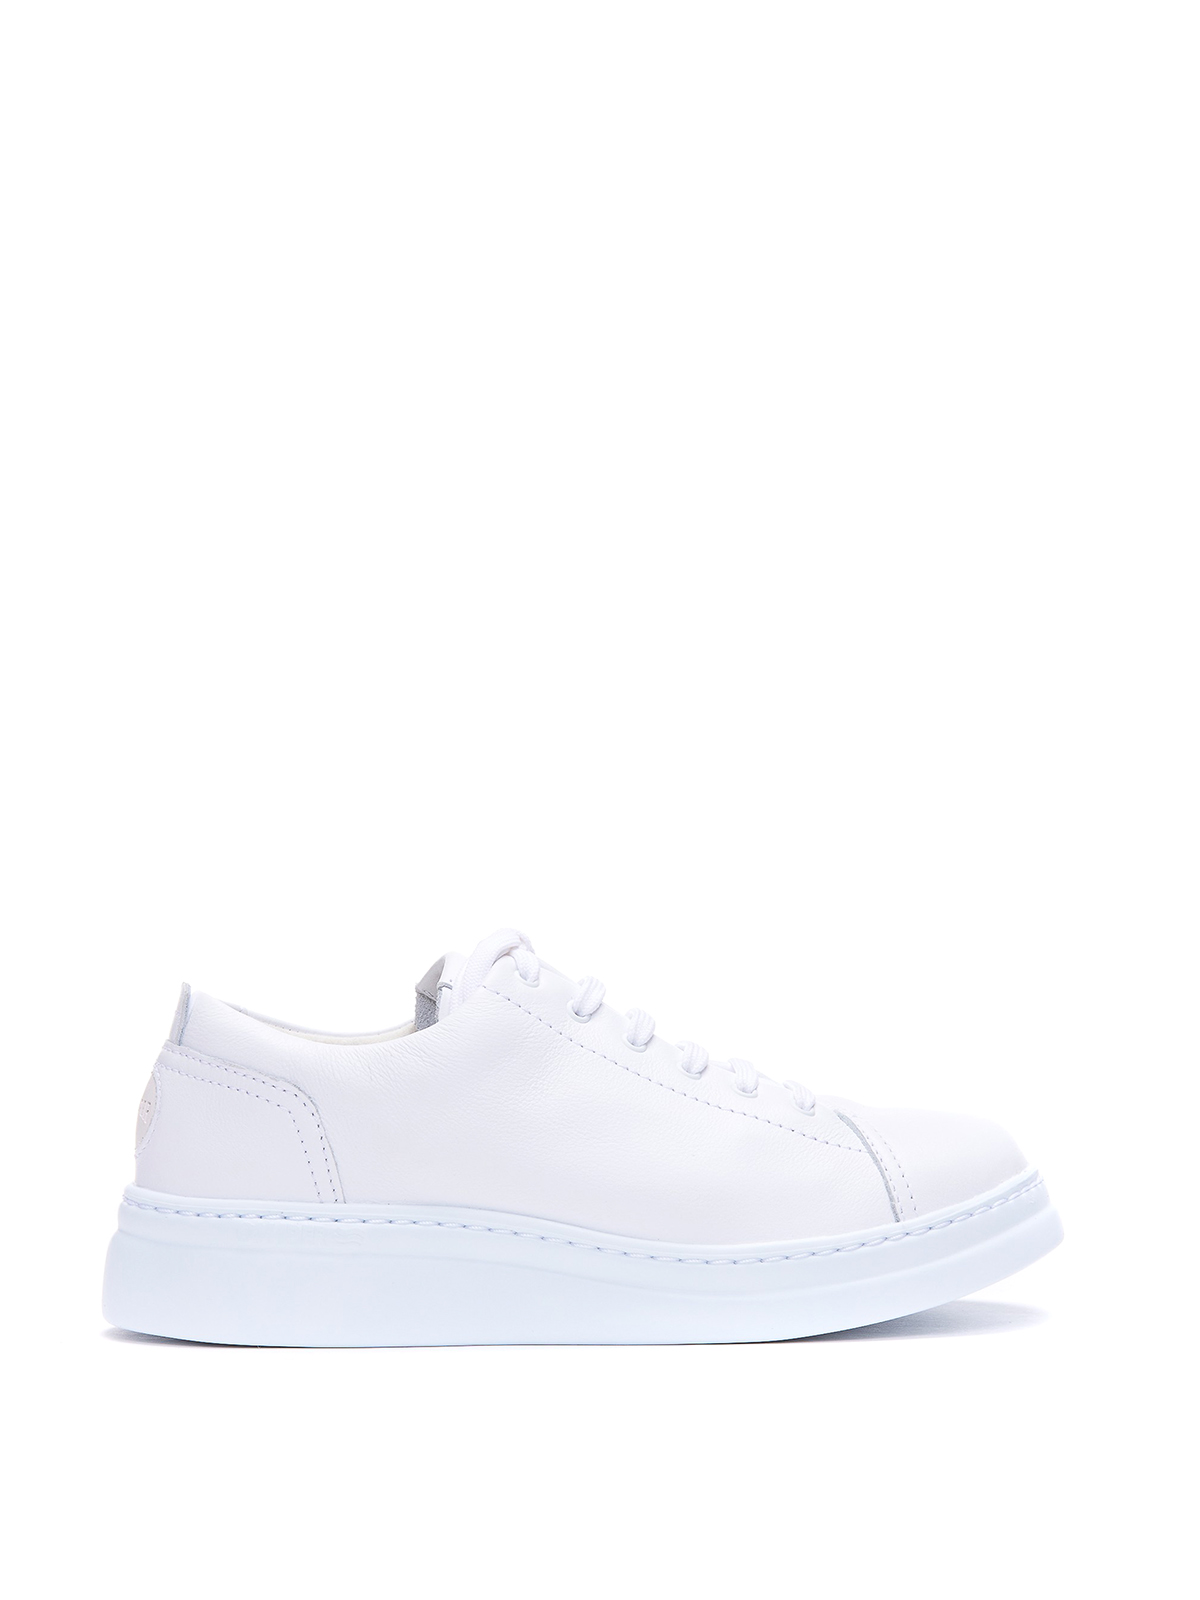 Shop Camper Logo Leather Sneakers In White